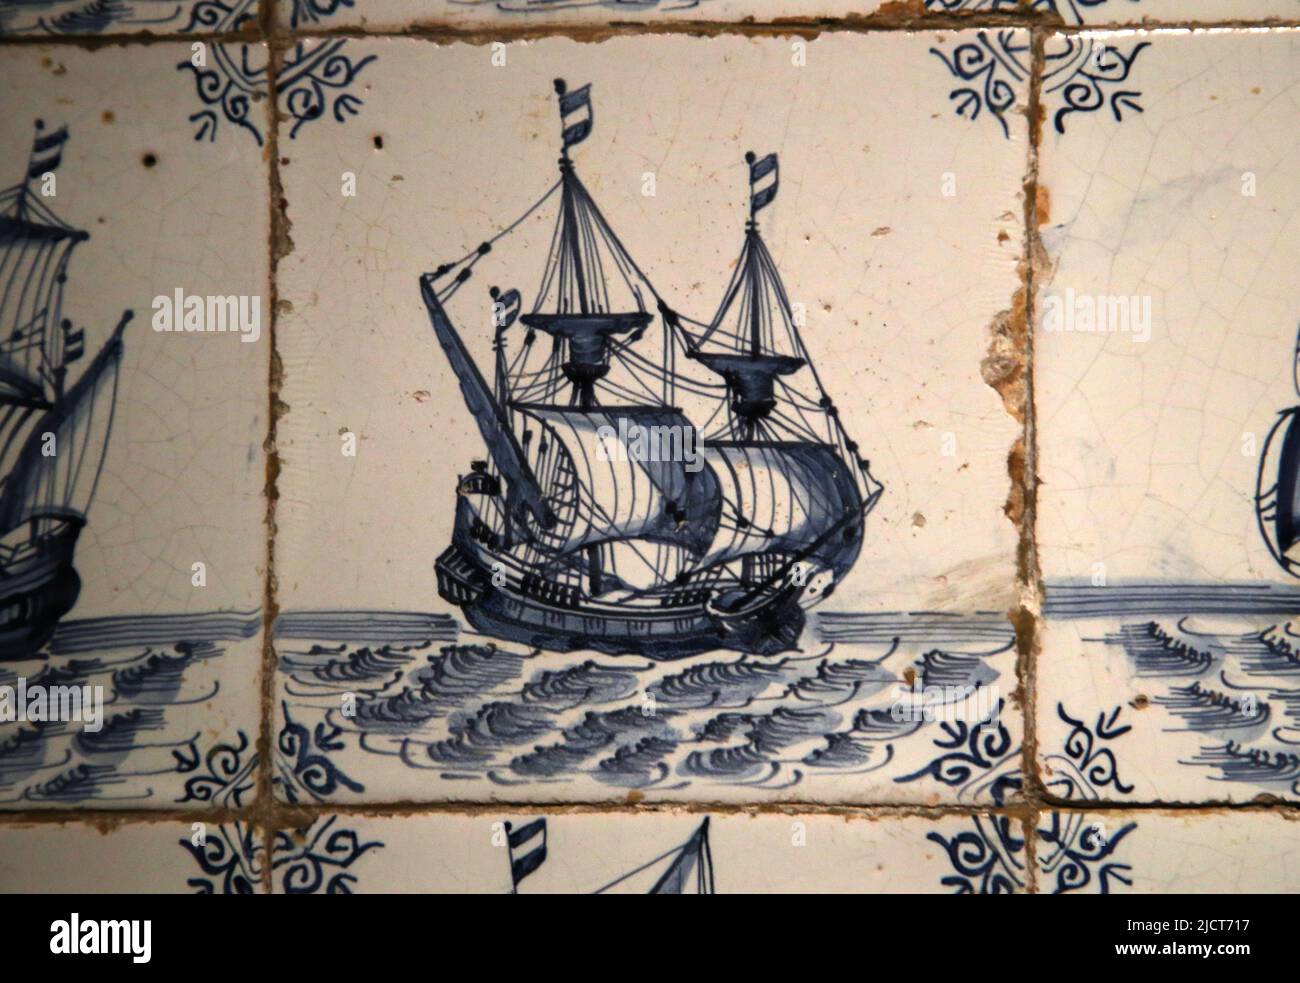 17th century. Modern era. Dutch product. Delftware (glased earthenware). Decorated with a ship. Rijksmuseum. Amsterdam. Netherlands. Stock Photo